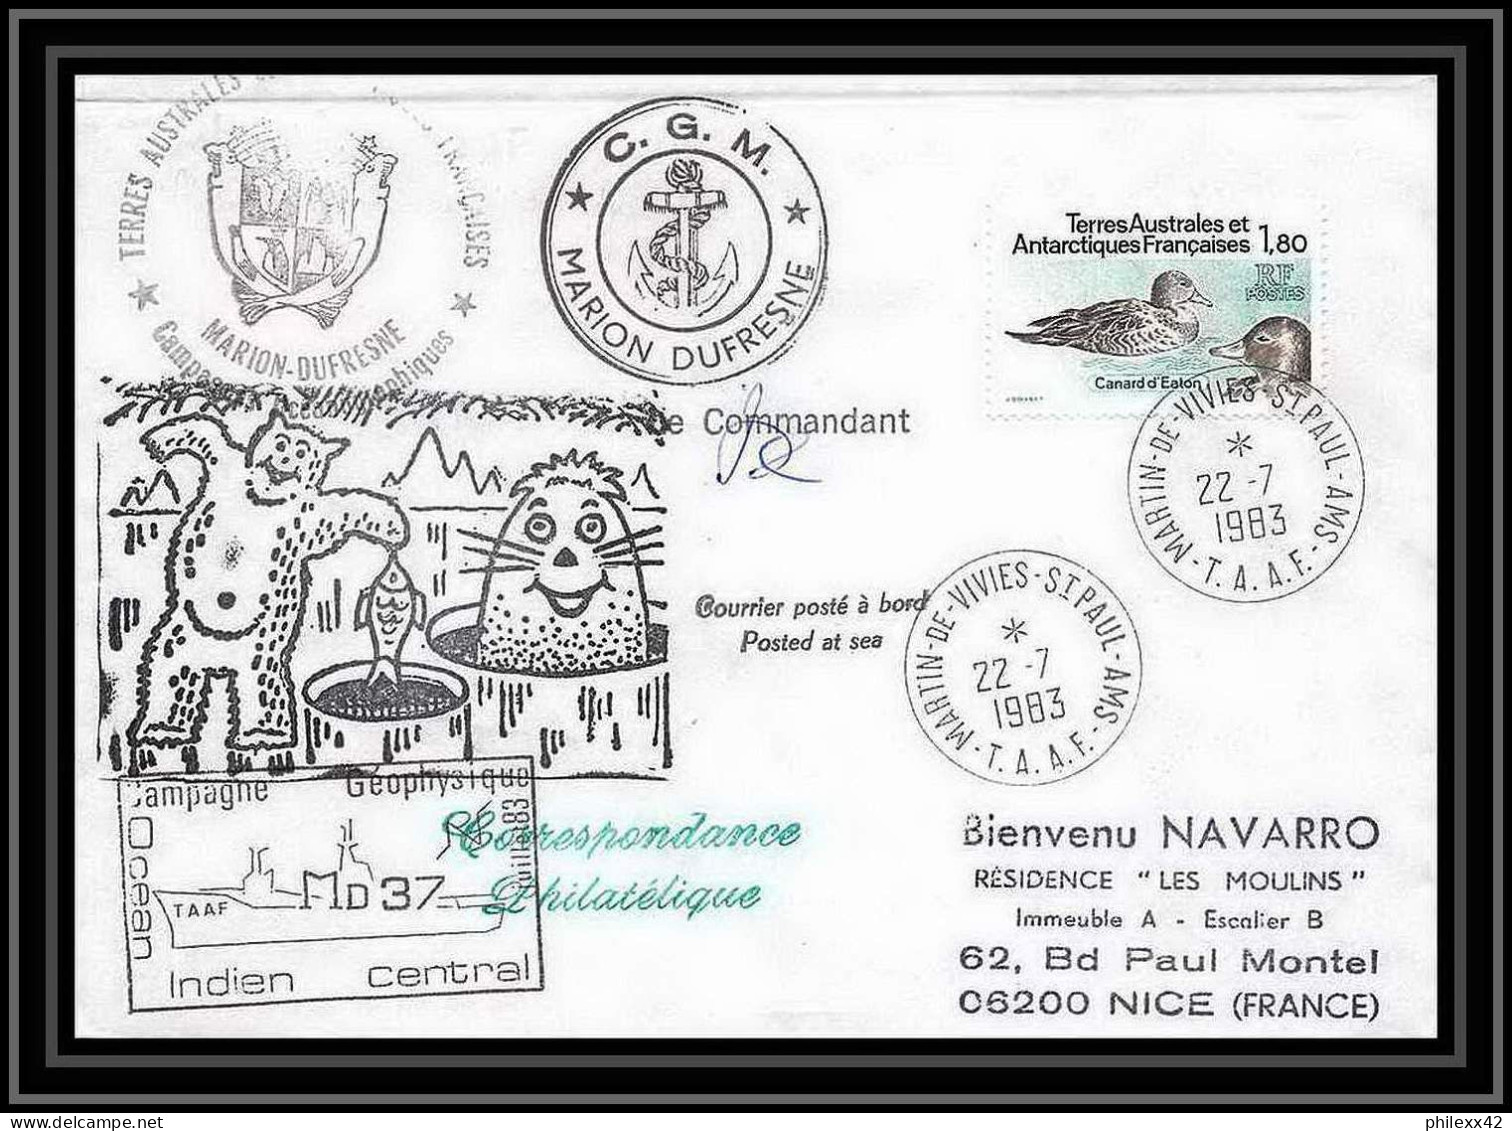 1420 Marion Dufresne Md 37 Signé Signed 22/7/1983 TAAF Antarctic Terres Australes Lettre (cover) - Antarctische Expedities